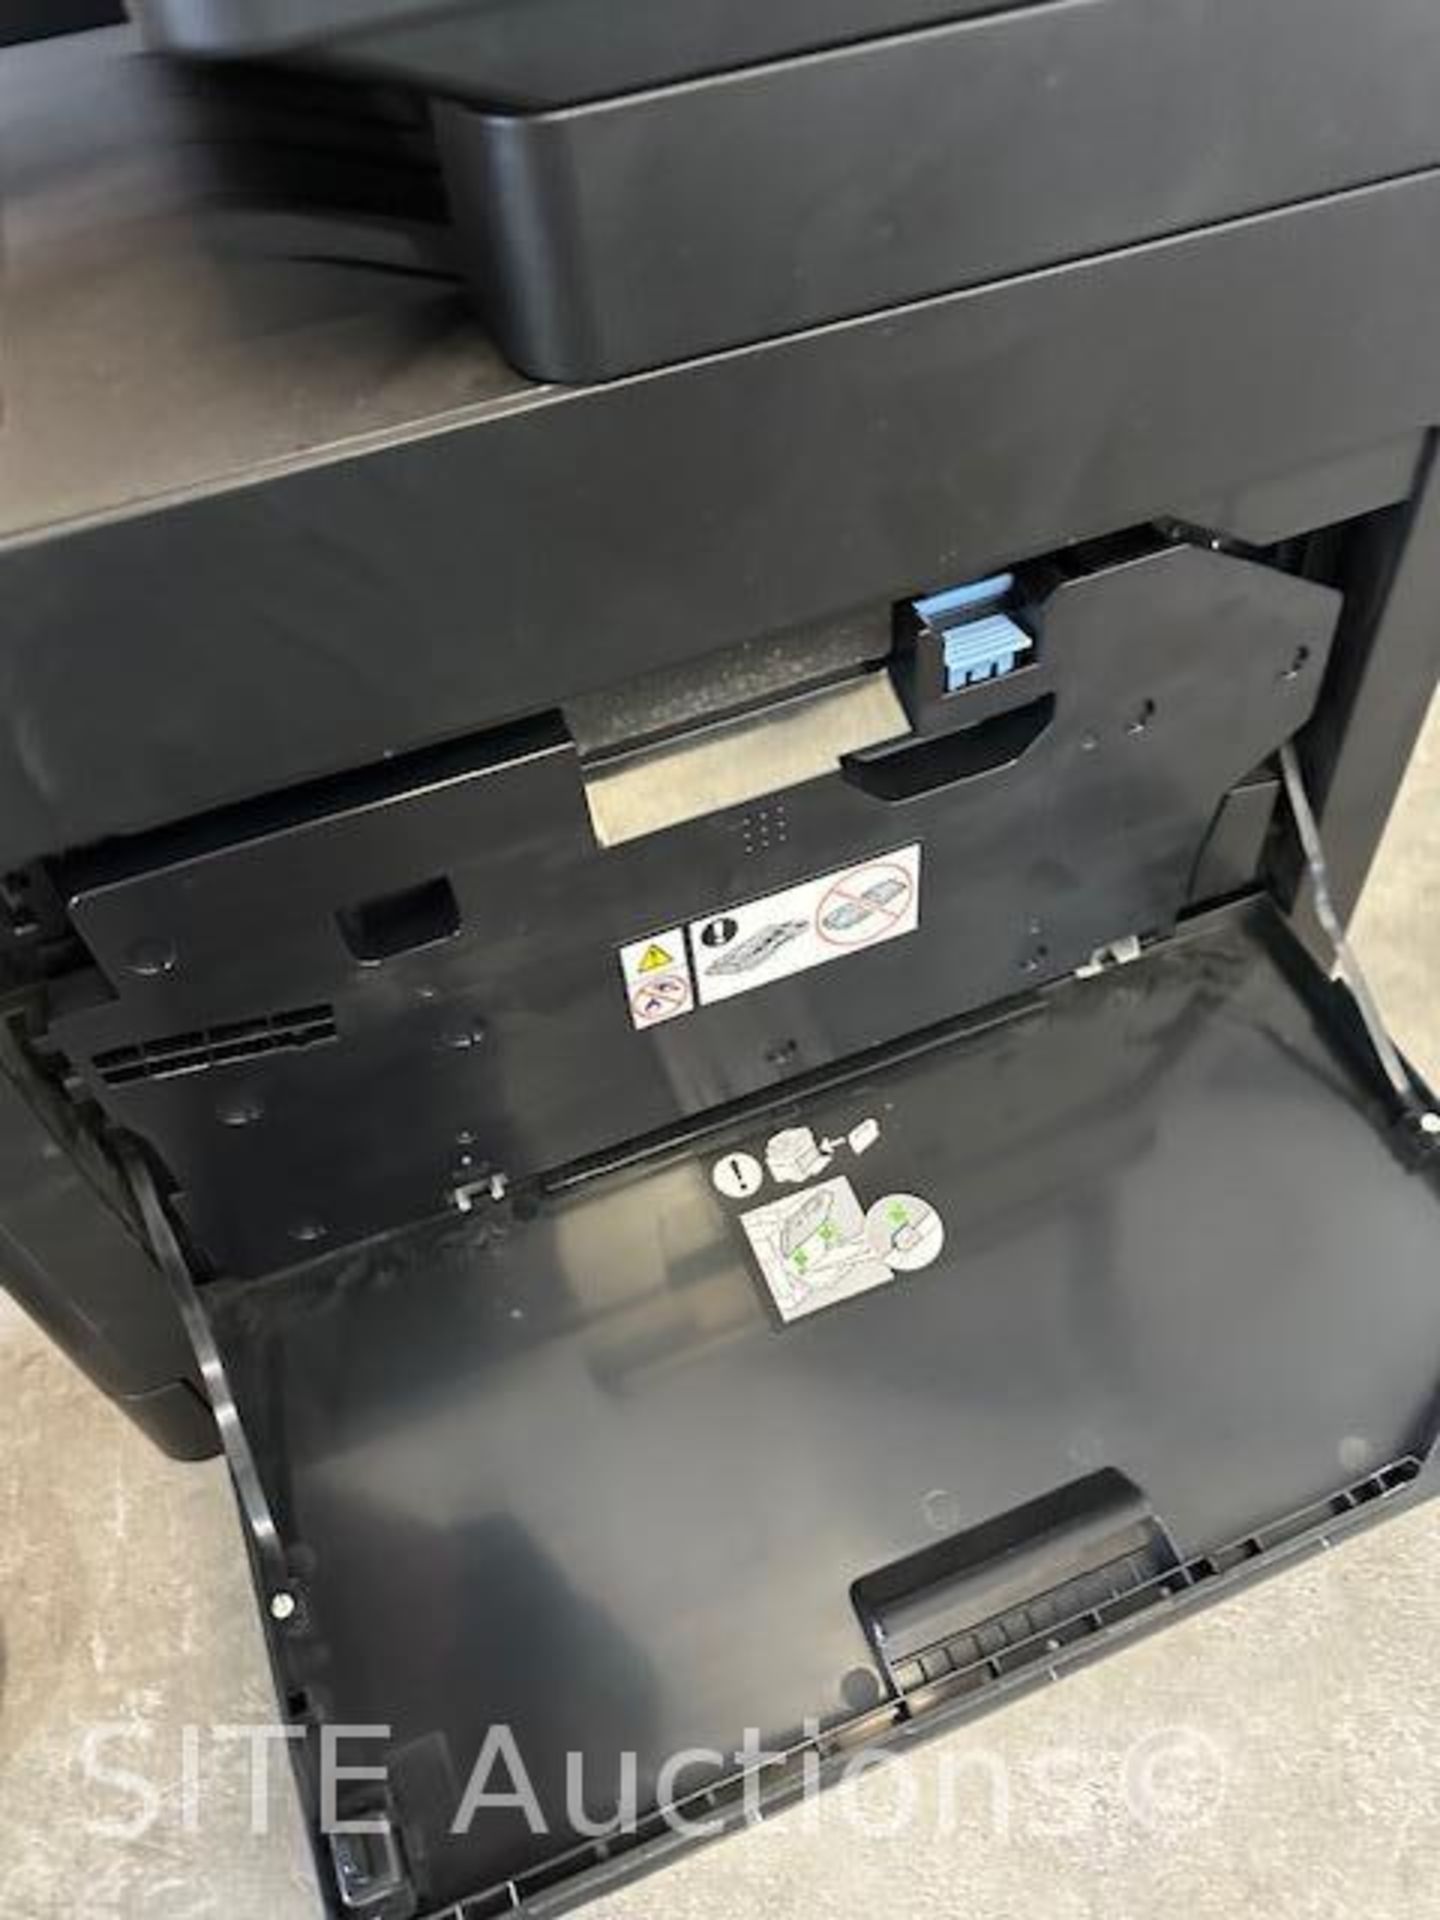 Dell Color Smart H625cdw Multifunction Printer - Image 4 of 6